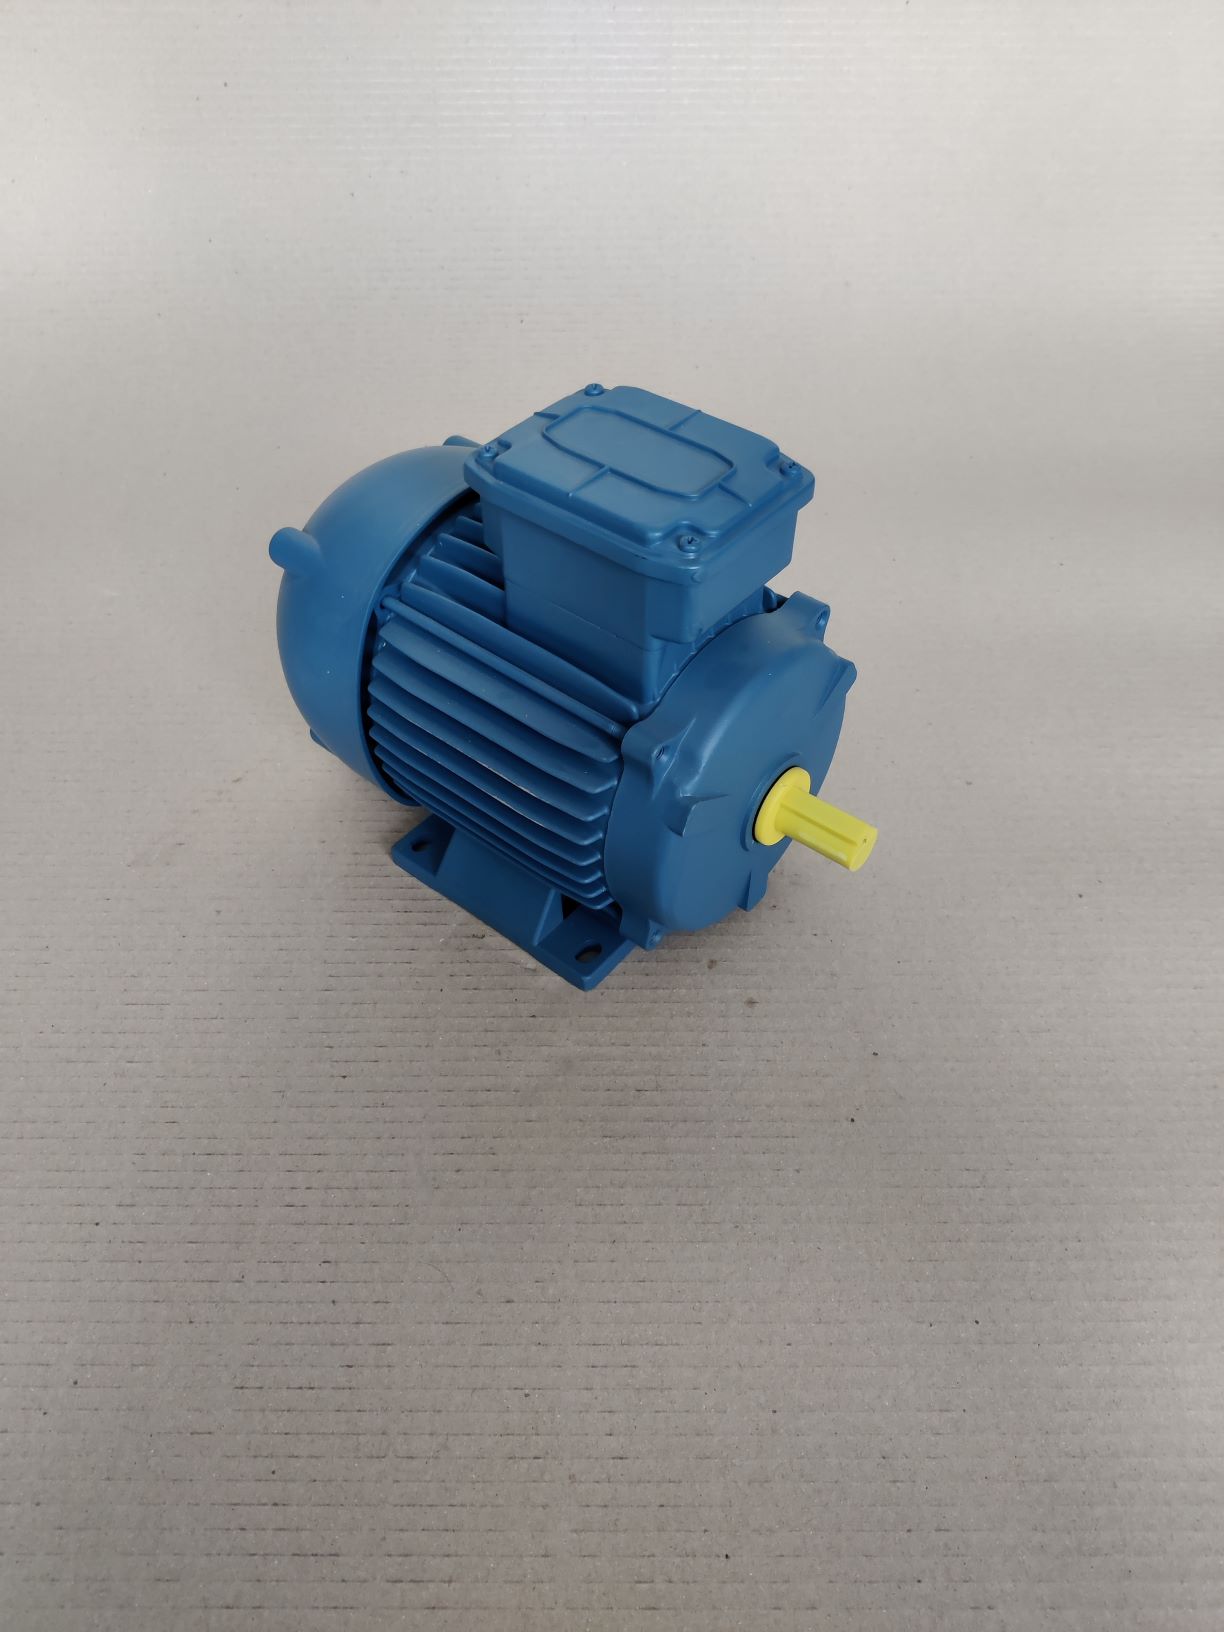 LAFERT SINGLE PHASE MOTOR  LM80C2  220V 2Ρ 0.75KW Β3 SHAFT EXTENSION